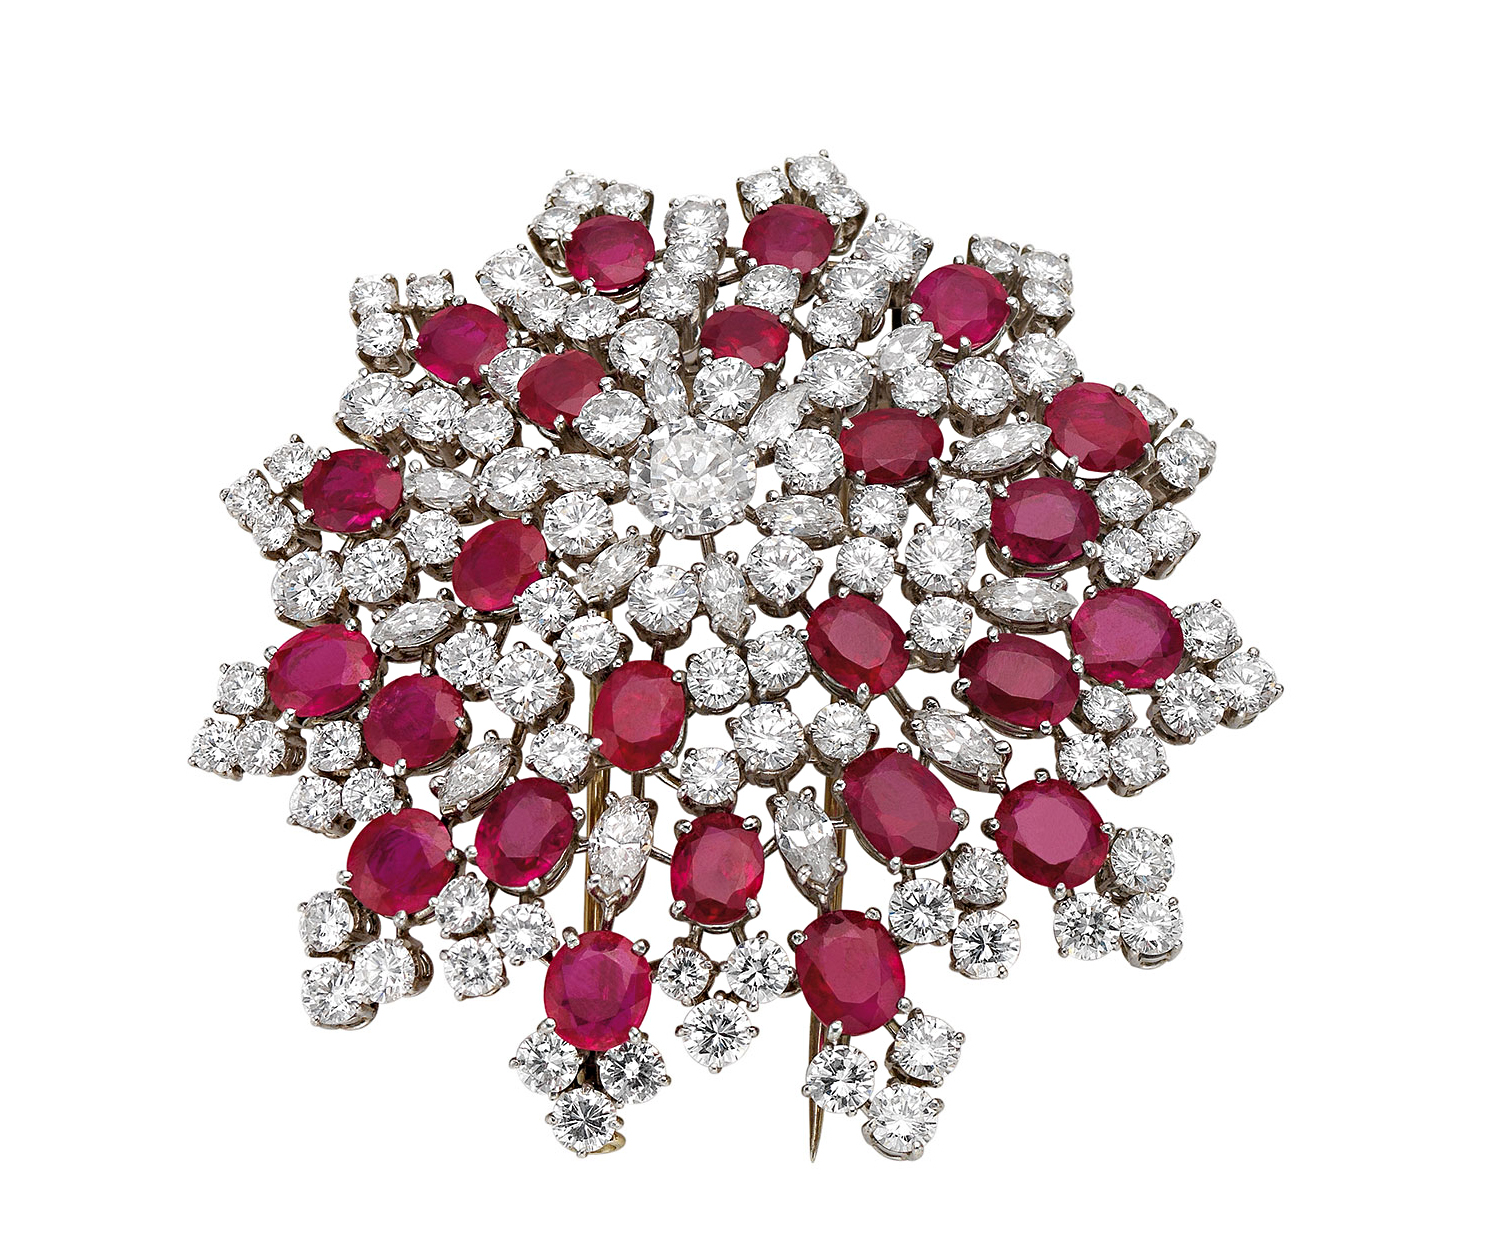 Brooch in platinum with rubies and diamonds - 1957. Much of the high jewelry of the 1950s and early 1960s conformed to the use of gemstones typical of the “Paris school” of jewelry design. This classic approach believed in combining the white of the diamond with only one other color – ruby, emerald, or sapphire – though never pairing them together. Bulgari began to defy this international norm in the decades to follow. Photo courtesy Houston Museum of Natural Science.